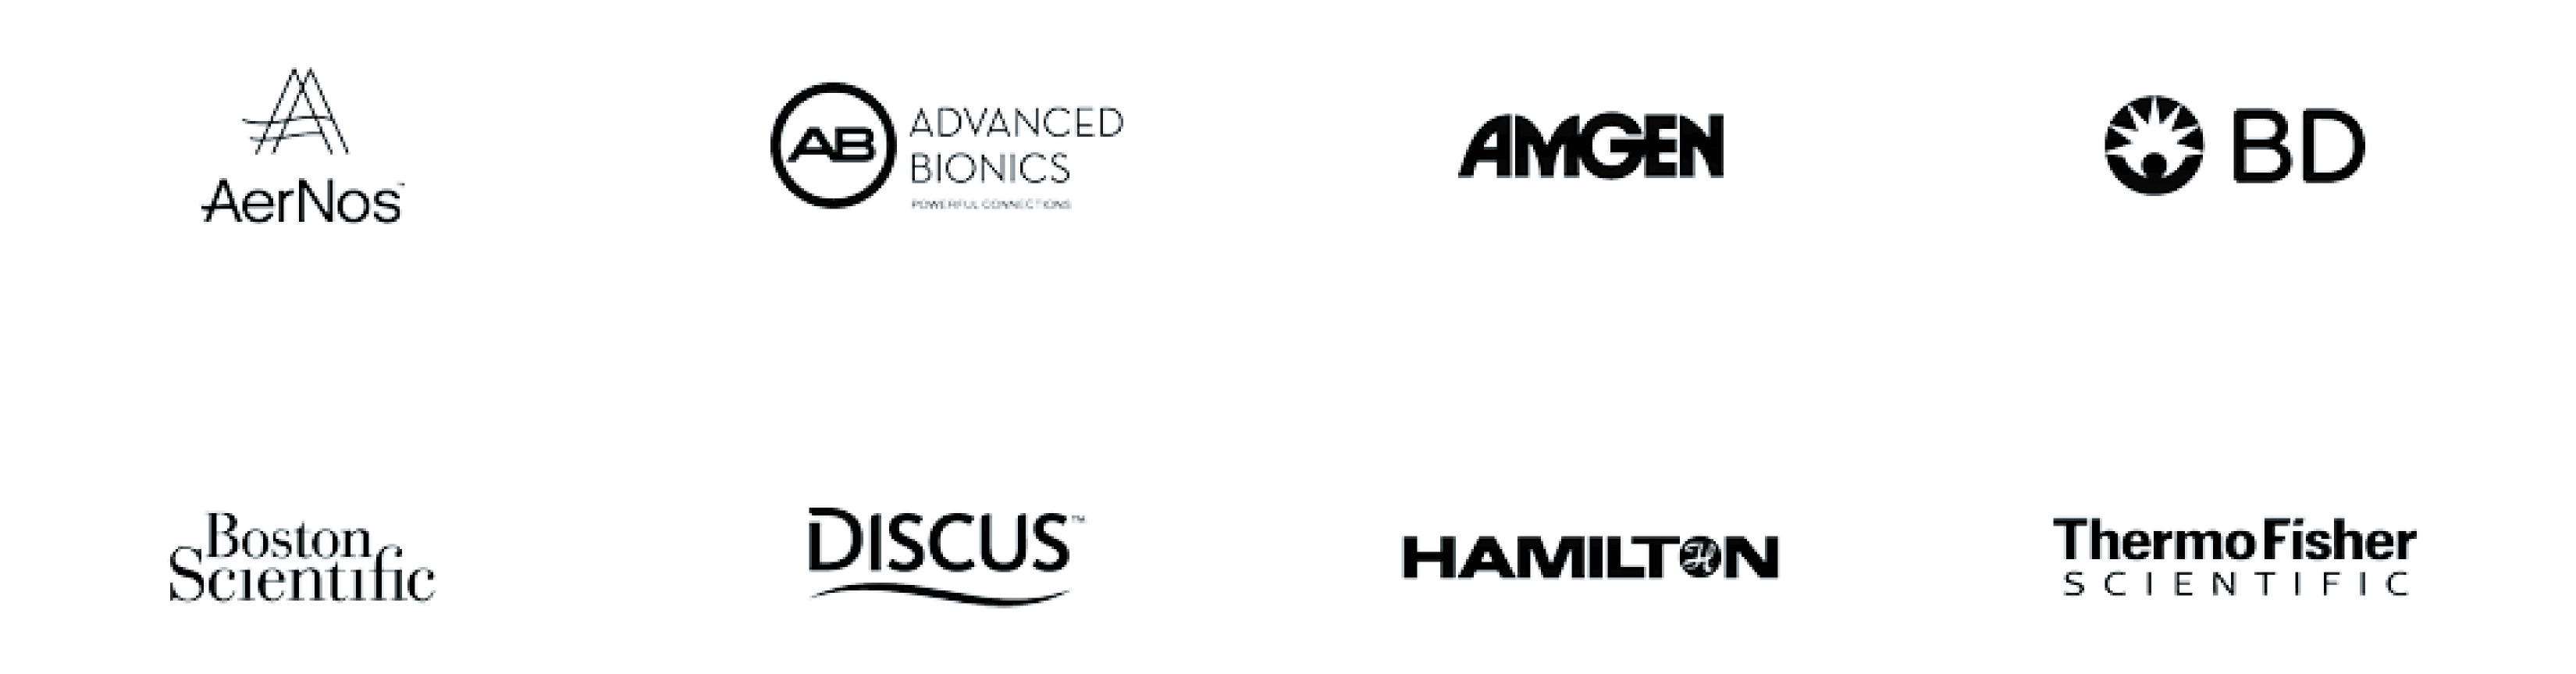 Logos of Innovation Product Development Clients